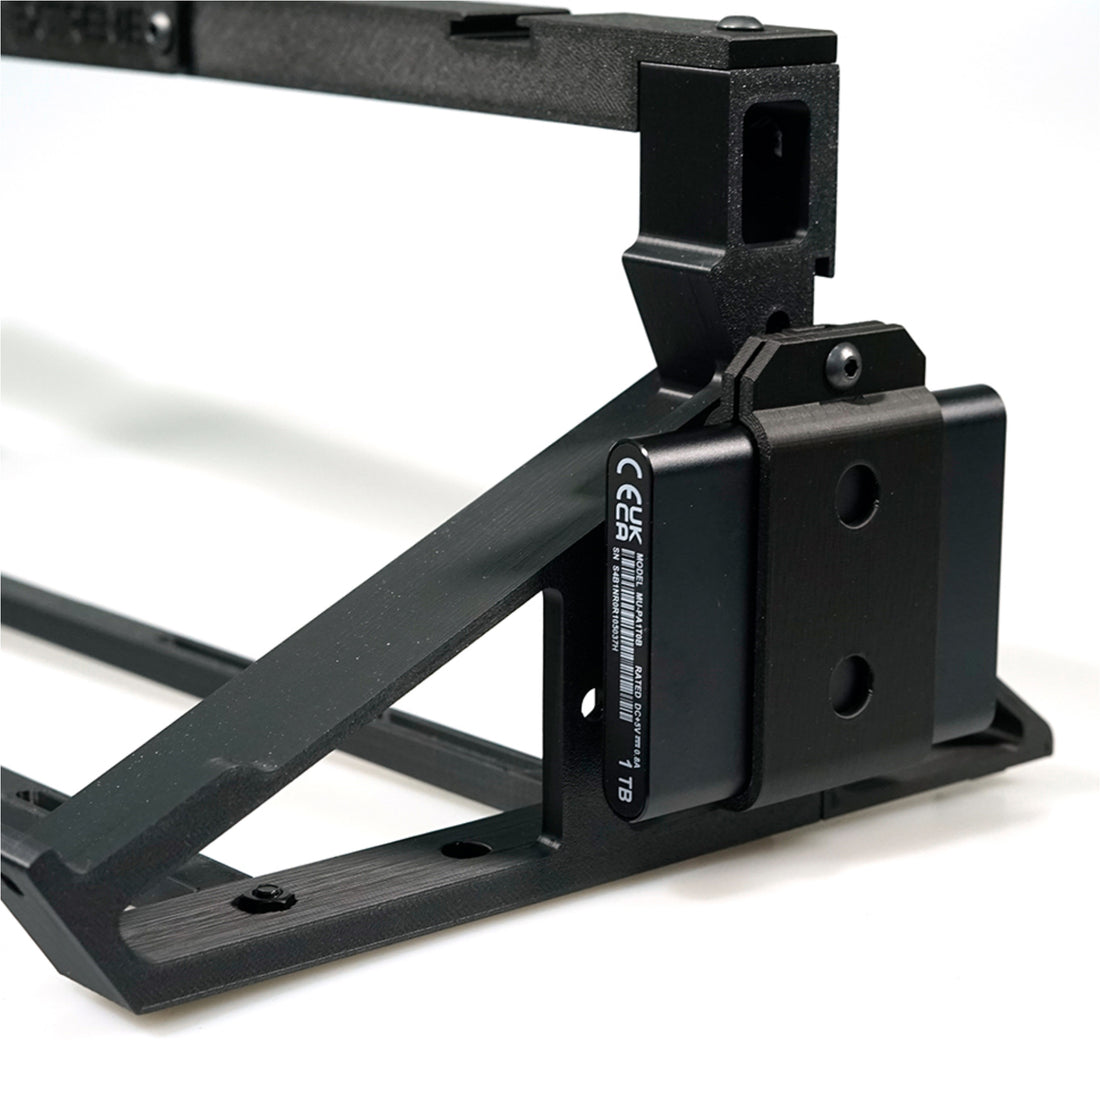 SSD Holder for PK1 Stands (Compatible with Samsung T5 / T7)